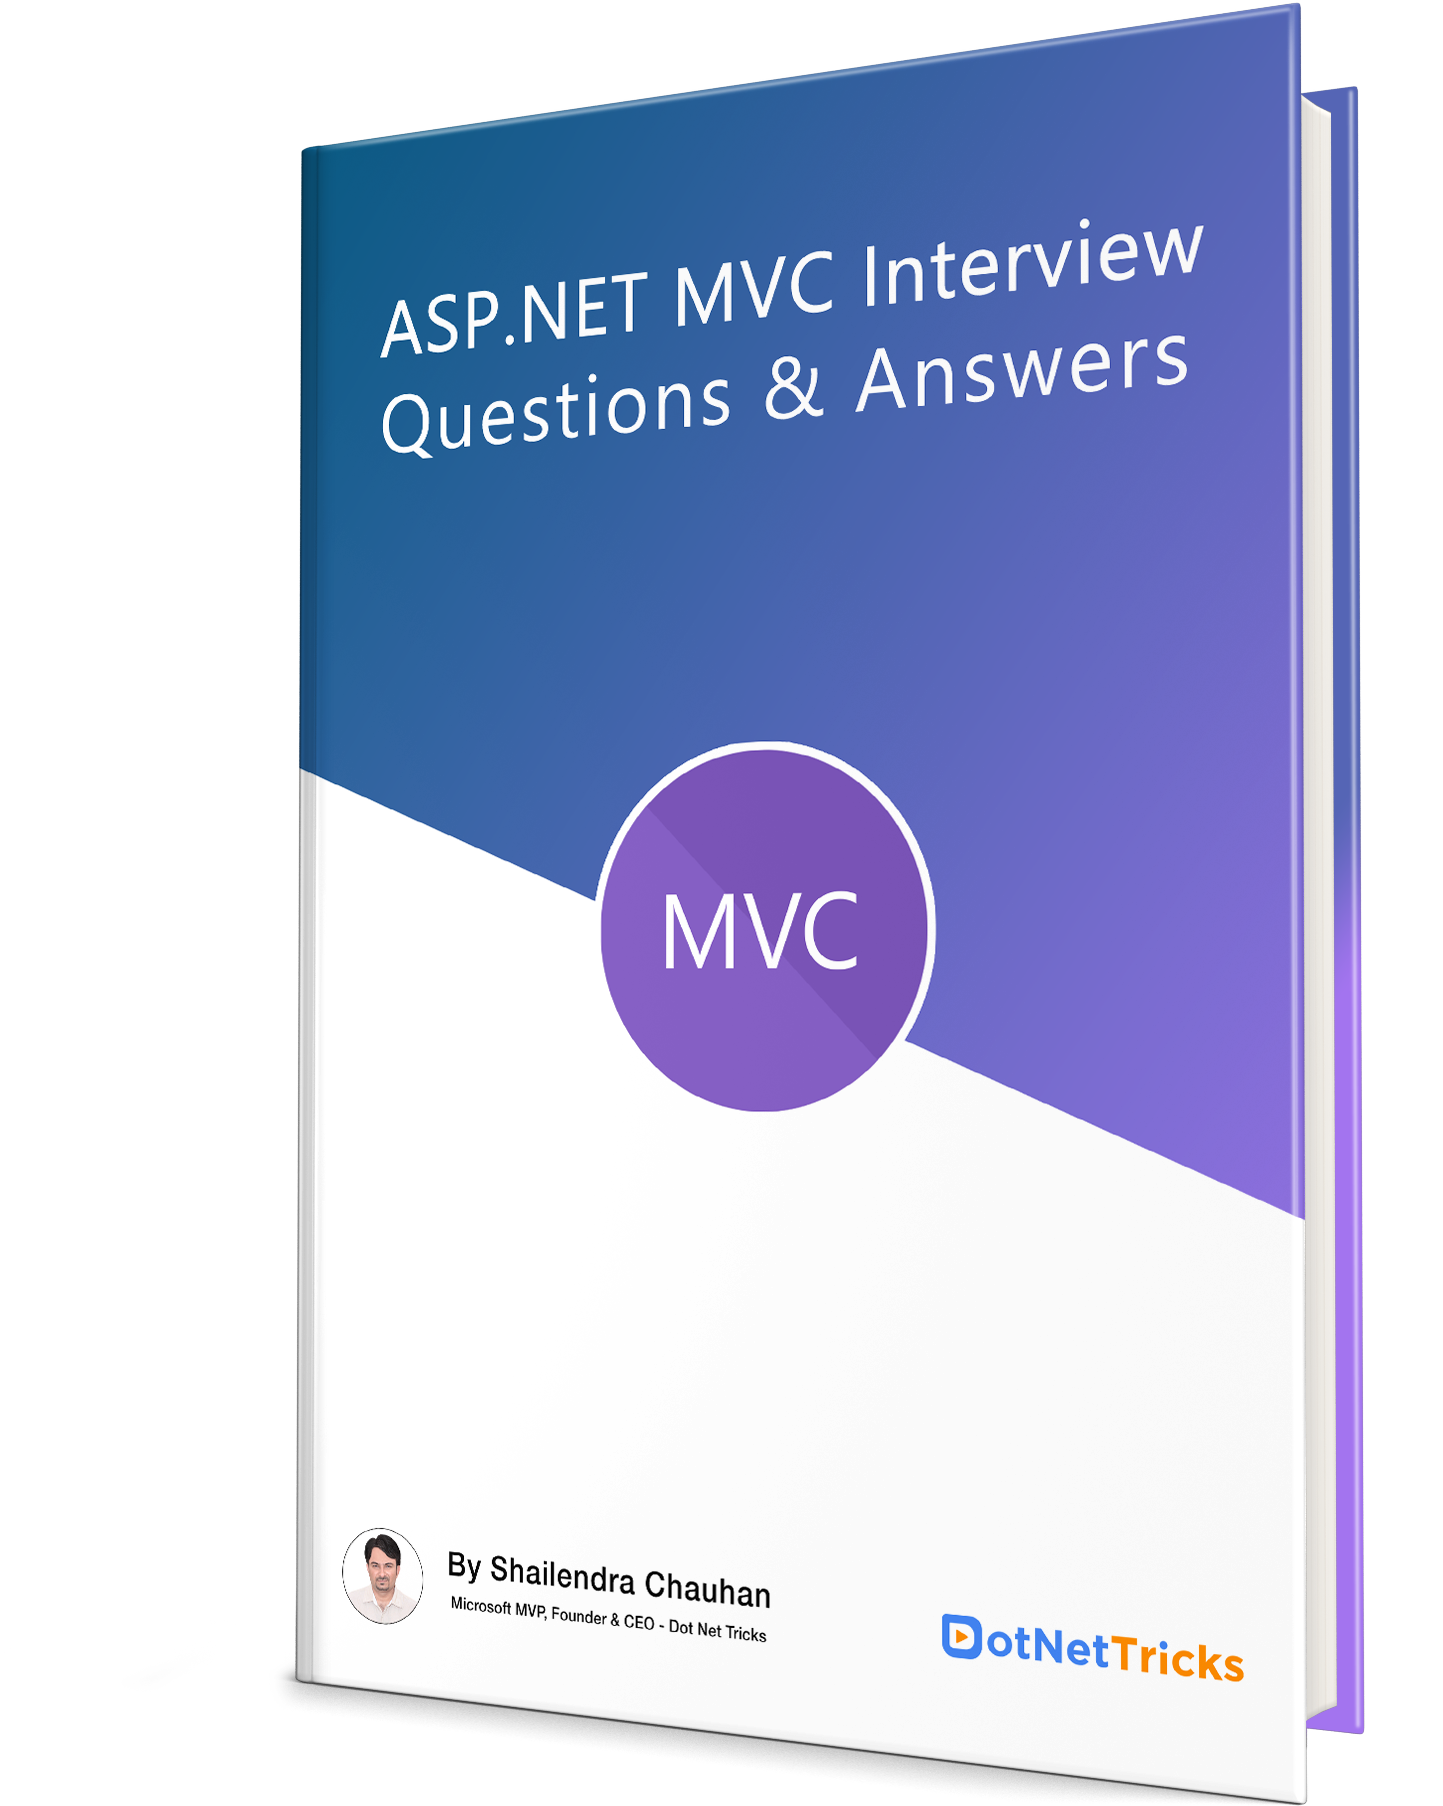 ASP.NET MVC Interview Questions and Answers eBook